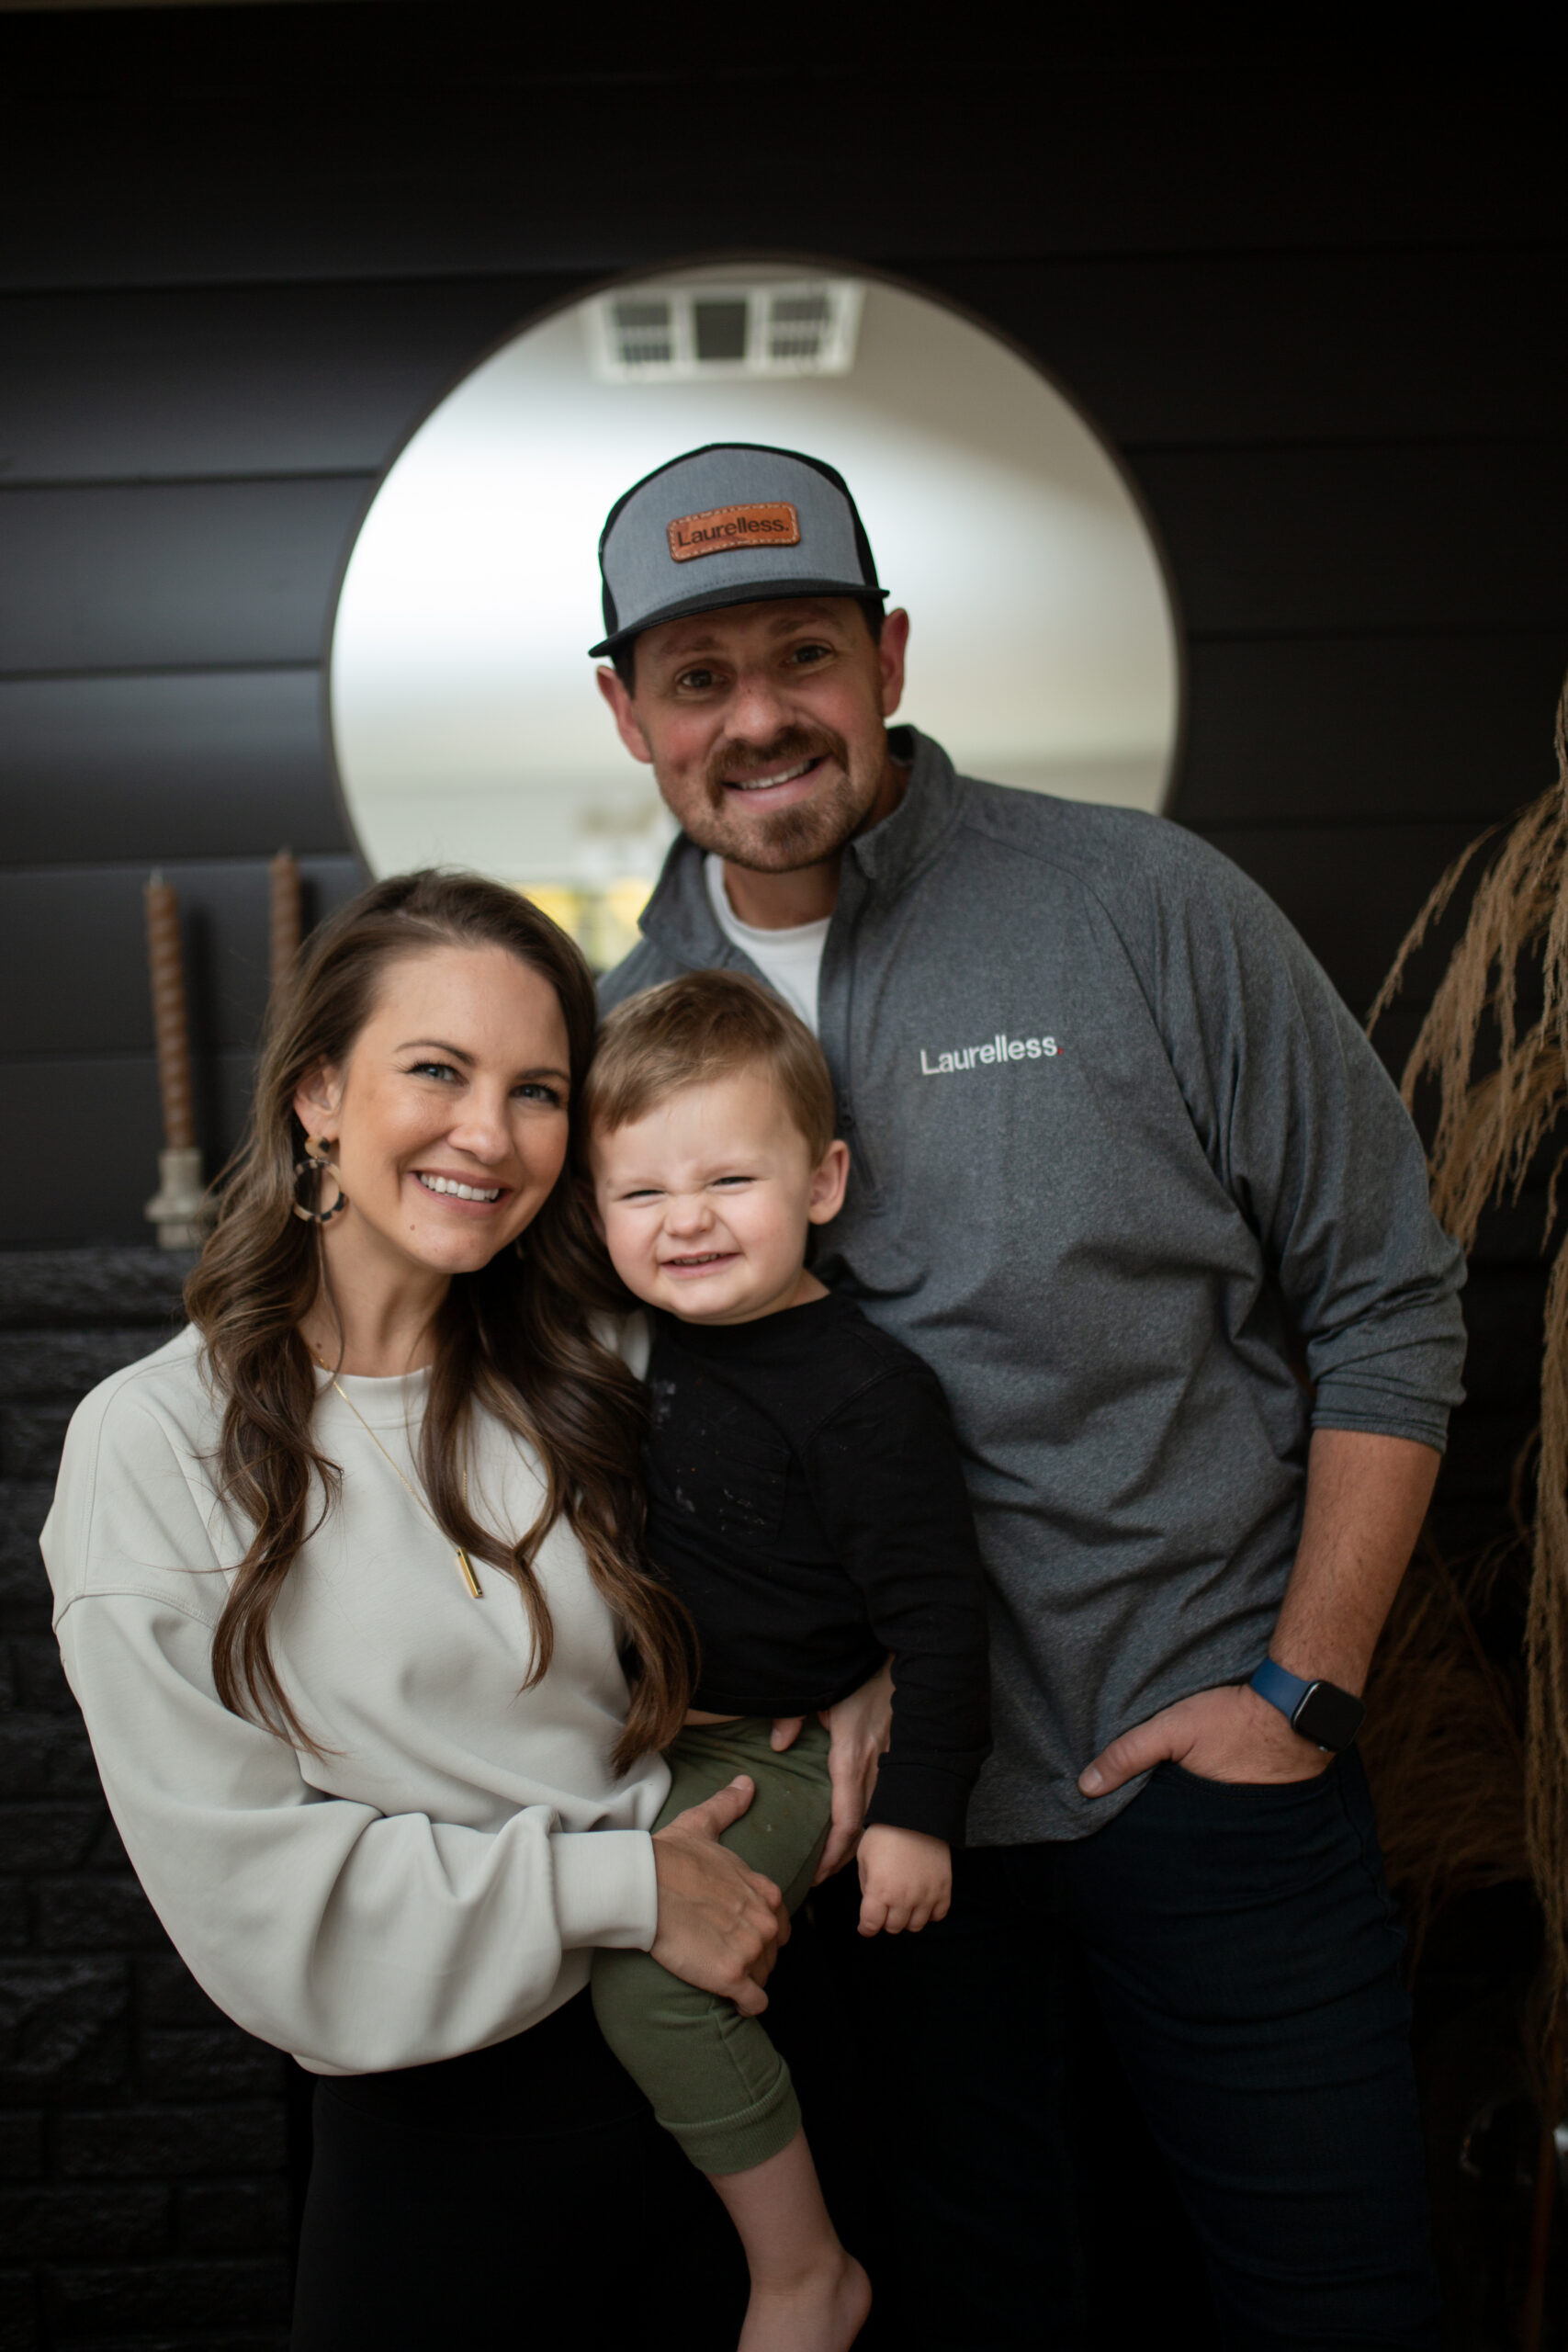 Laurelless founders, leaders, and husband-wife team pose with their son inside a recent home remodel